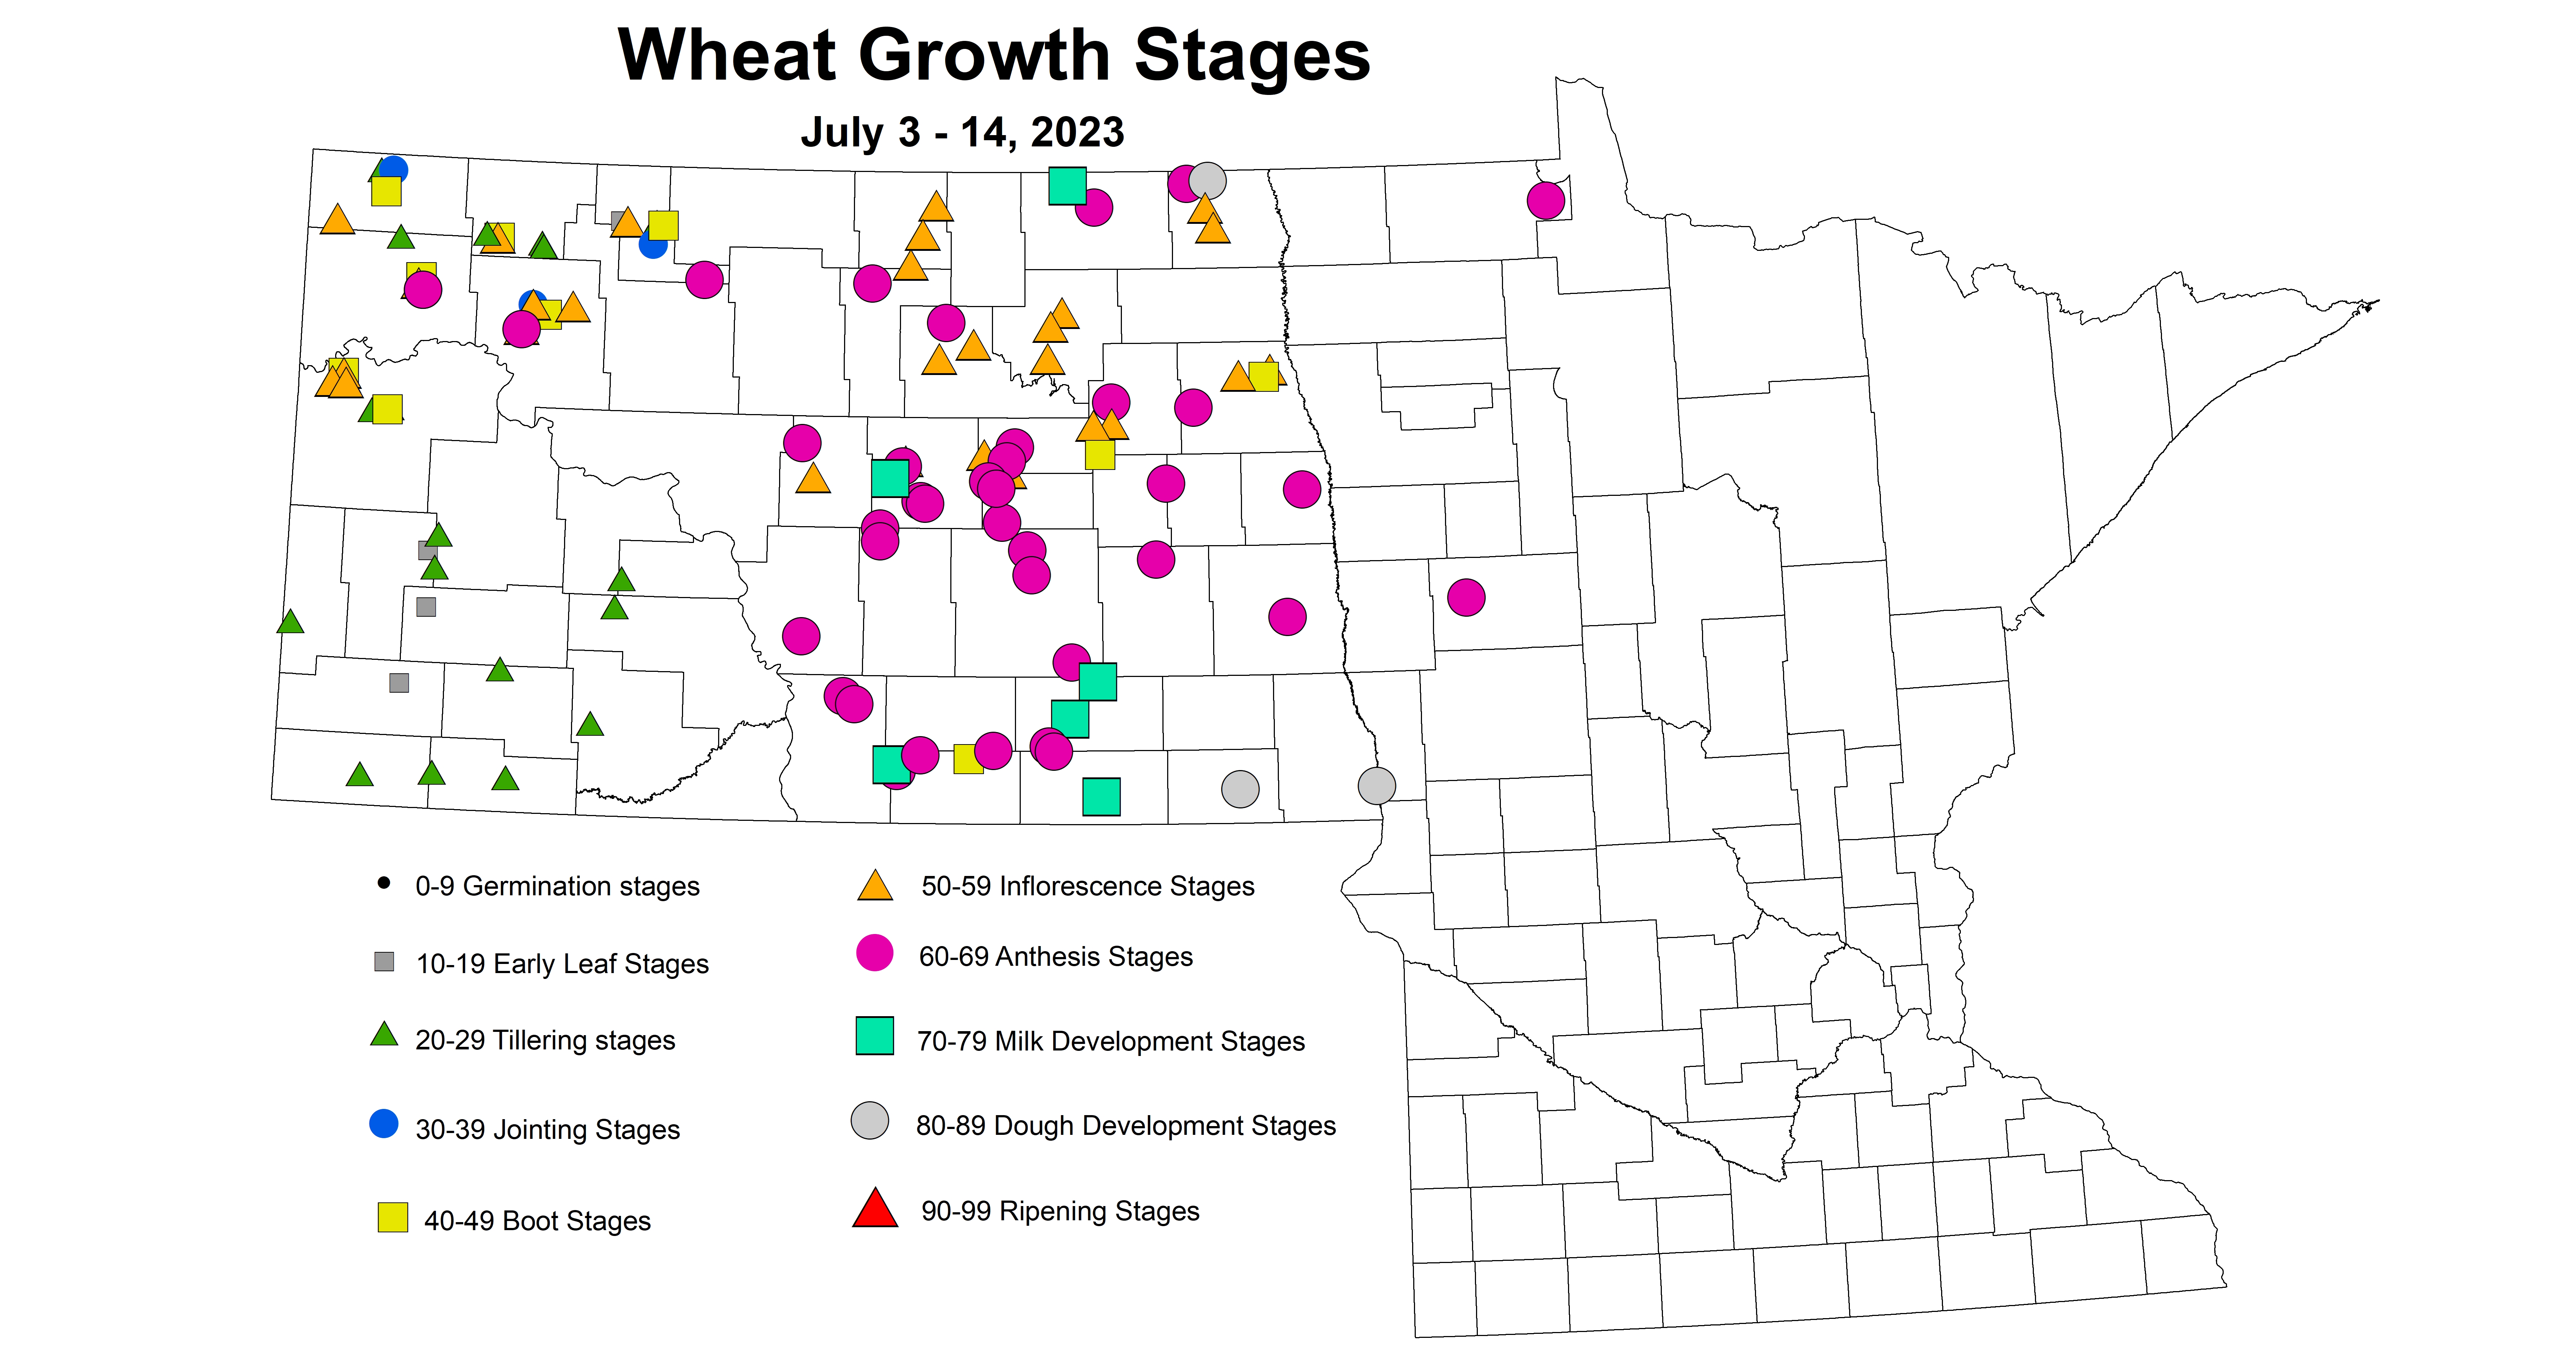 wheat growth stages July 3-14 2023